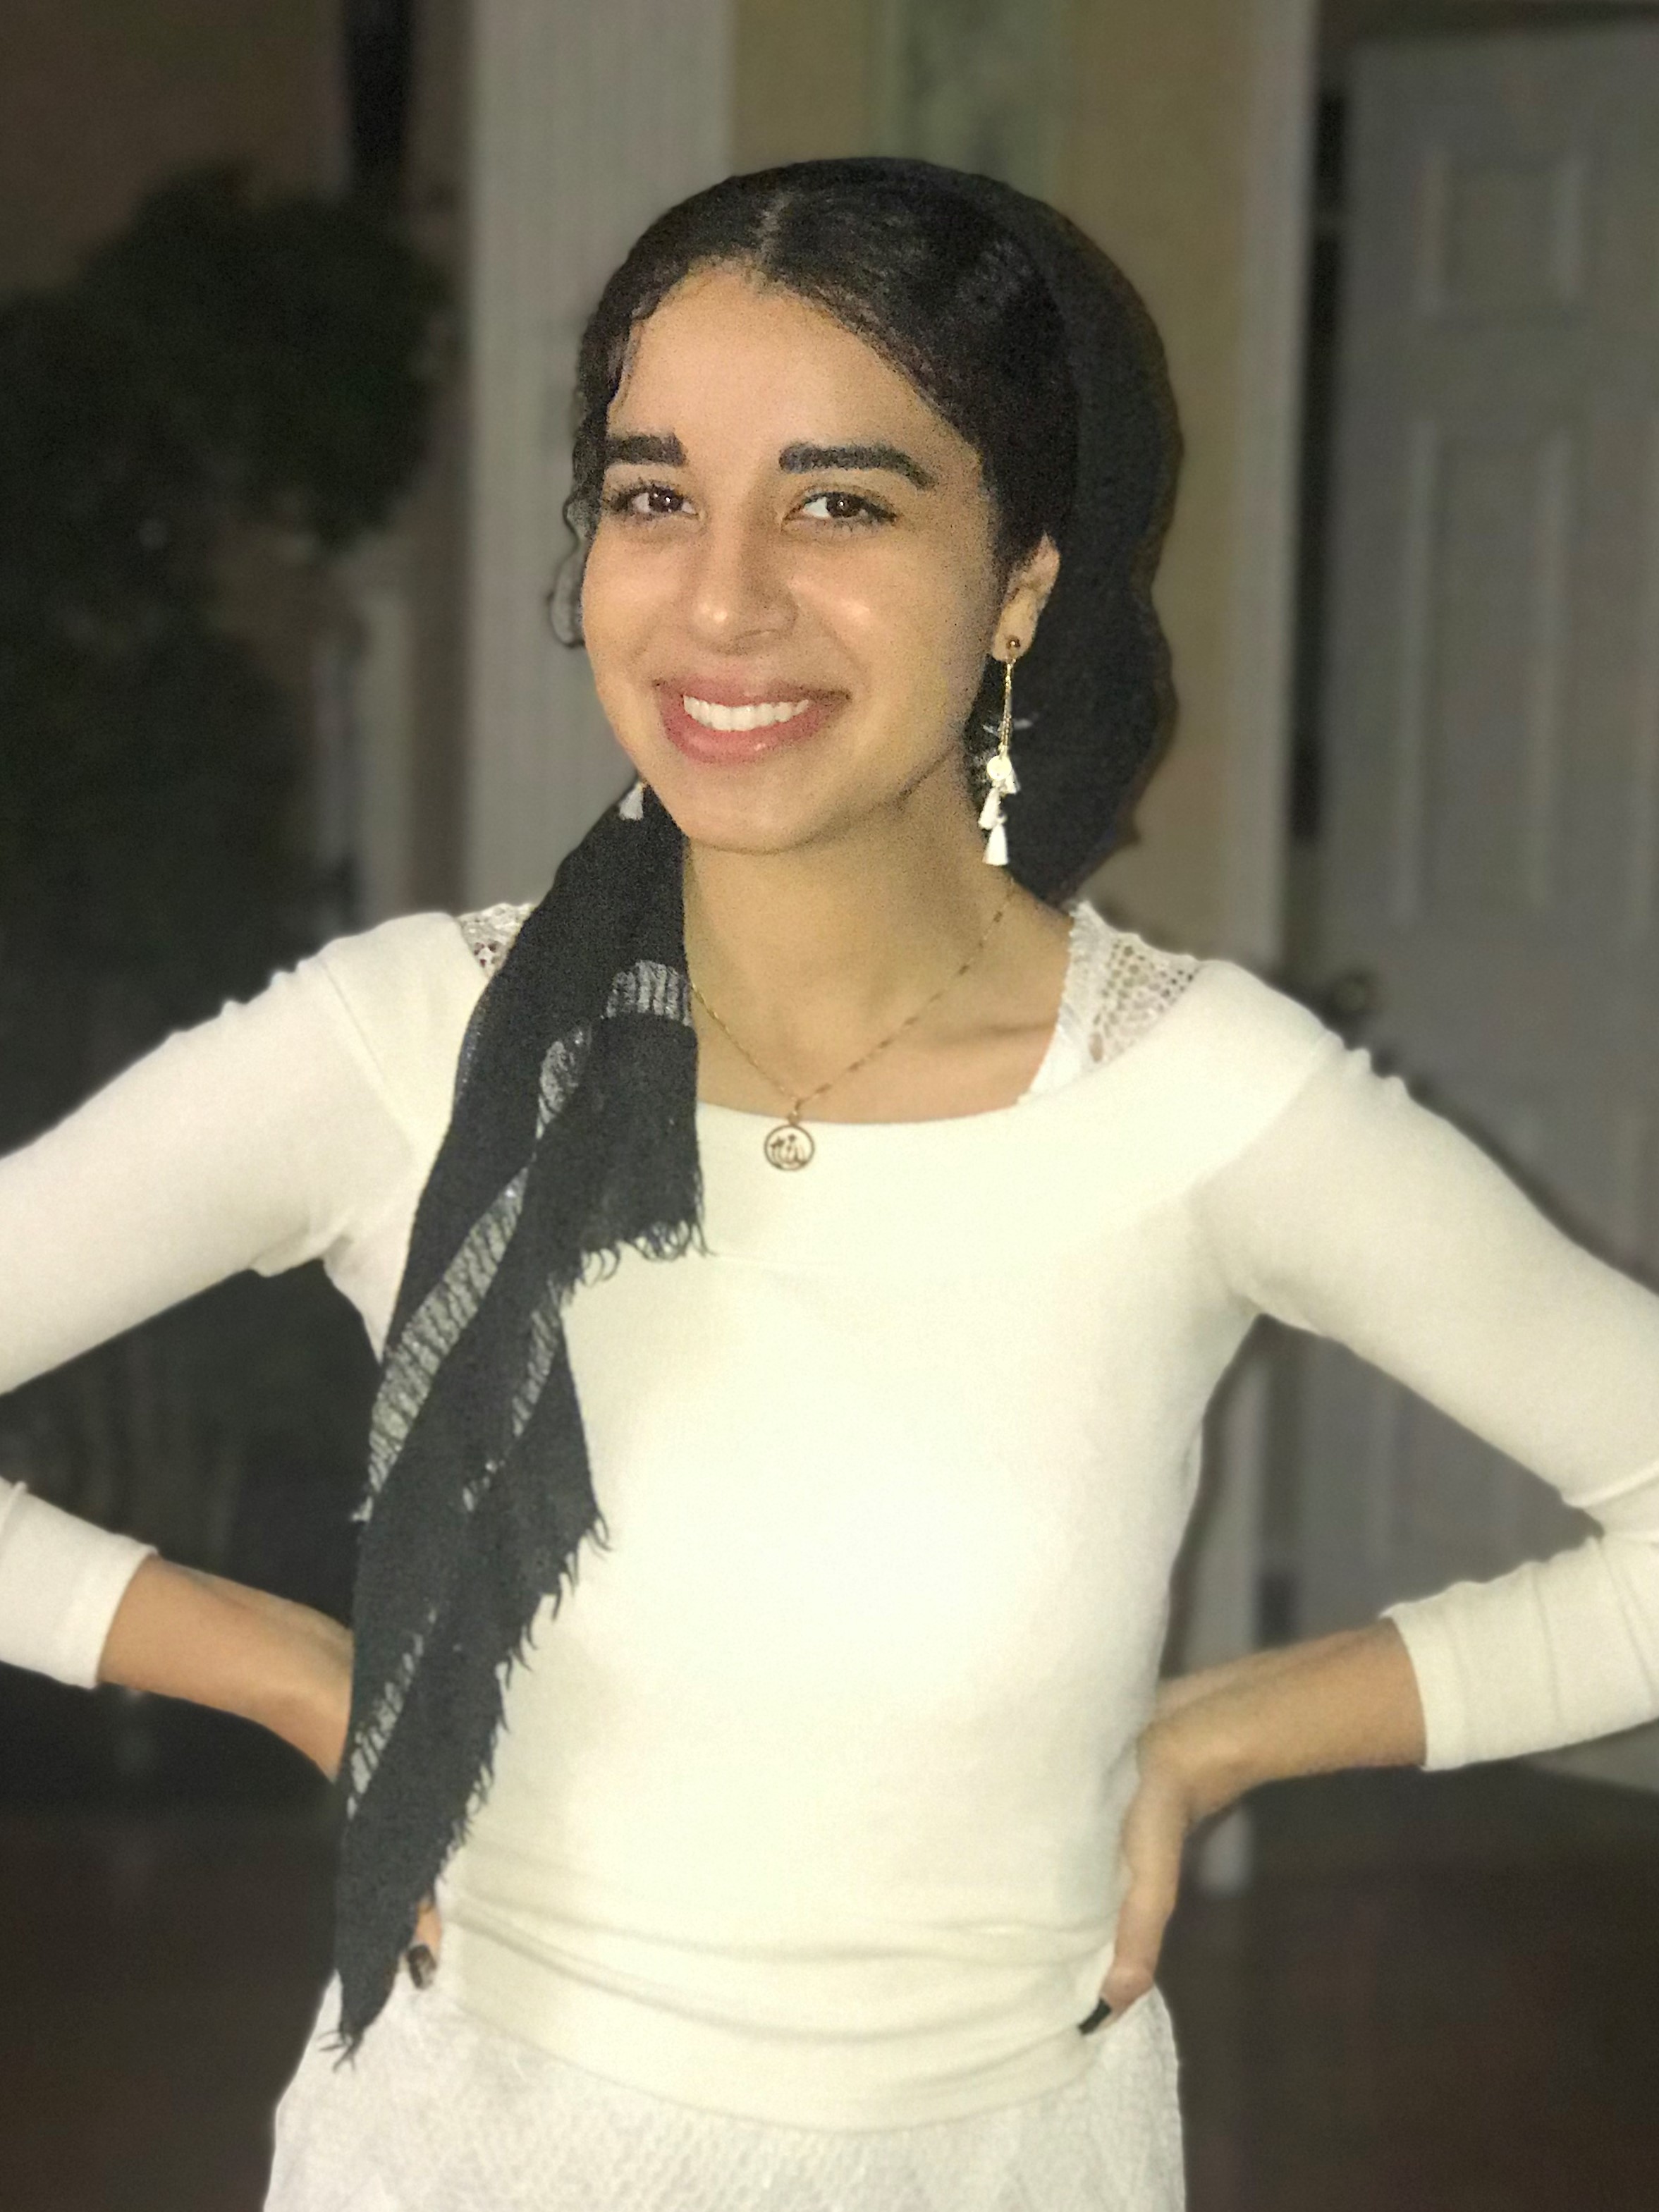 Maryum Elnasseh wearing a white shirt with earrings